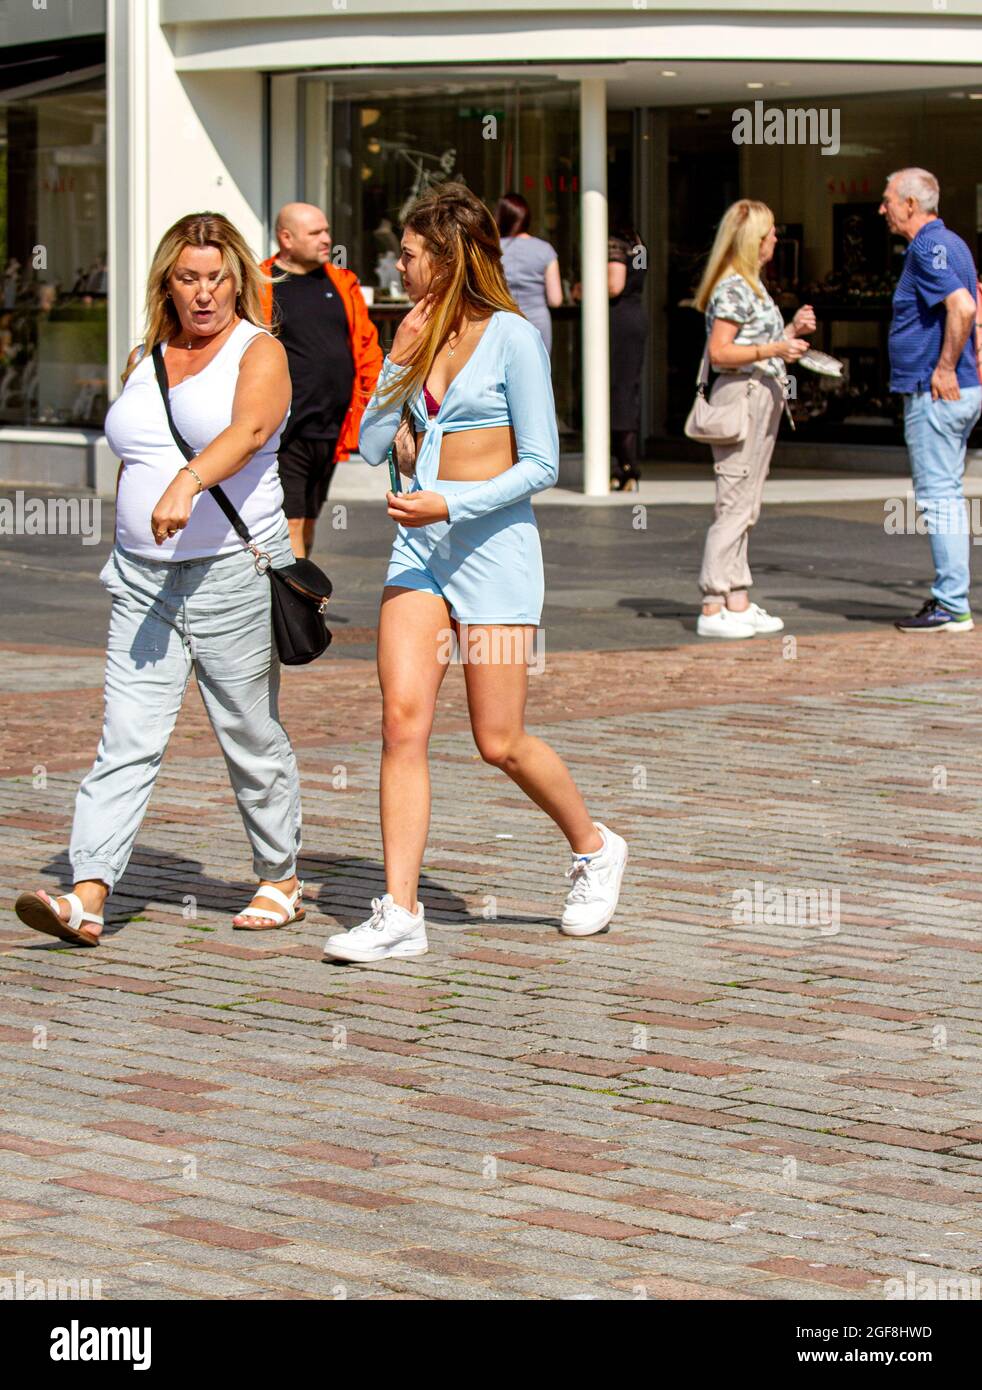 Dundee, Tayside, Scotland, UK. 24th Aug, 2021. UK weather: Glorious warm sunshine across North East Scotland with temperatures reaching 21°C. The late Summer heatwave attracts many local resident to take the day out to enjoy socialising outside after months of Coronavirus lockdowns. A glamorous young woman enjoying the weather walking with her mother whilst having fun in Dundee city centre. Credit: Dundee Photographics/Alamy Live News Stock Photo